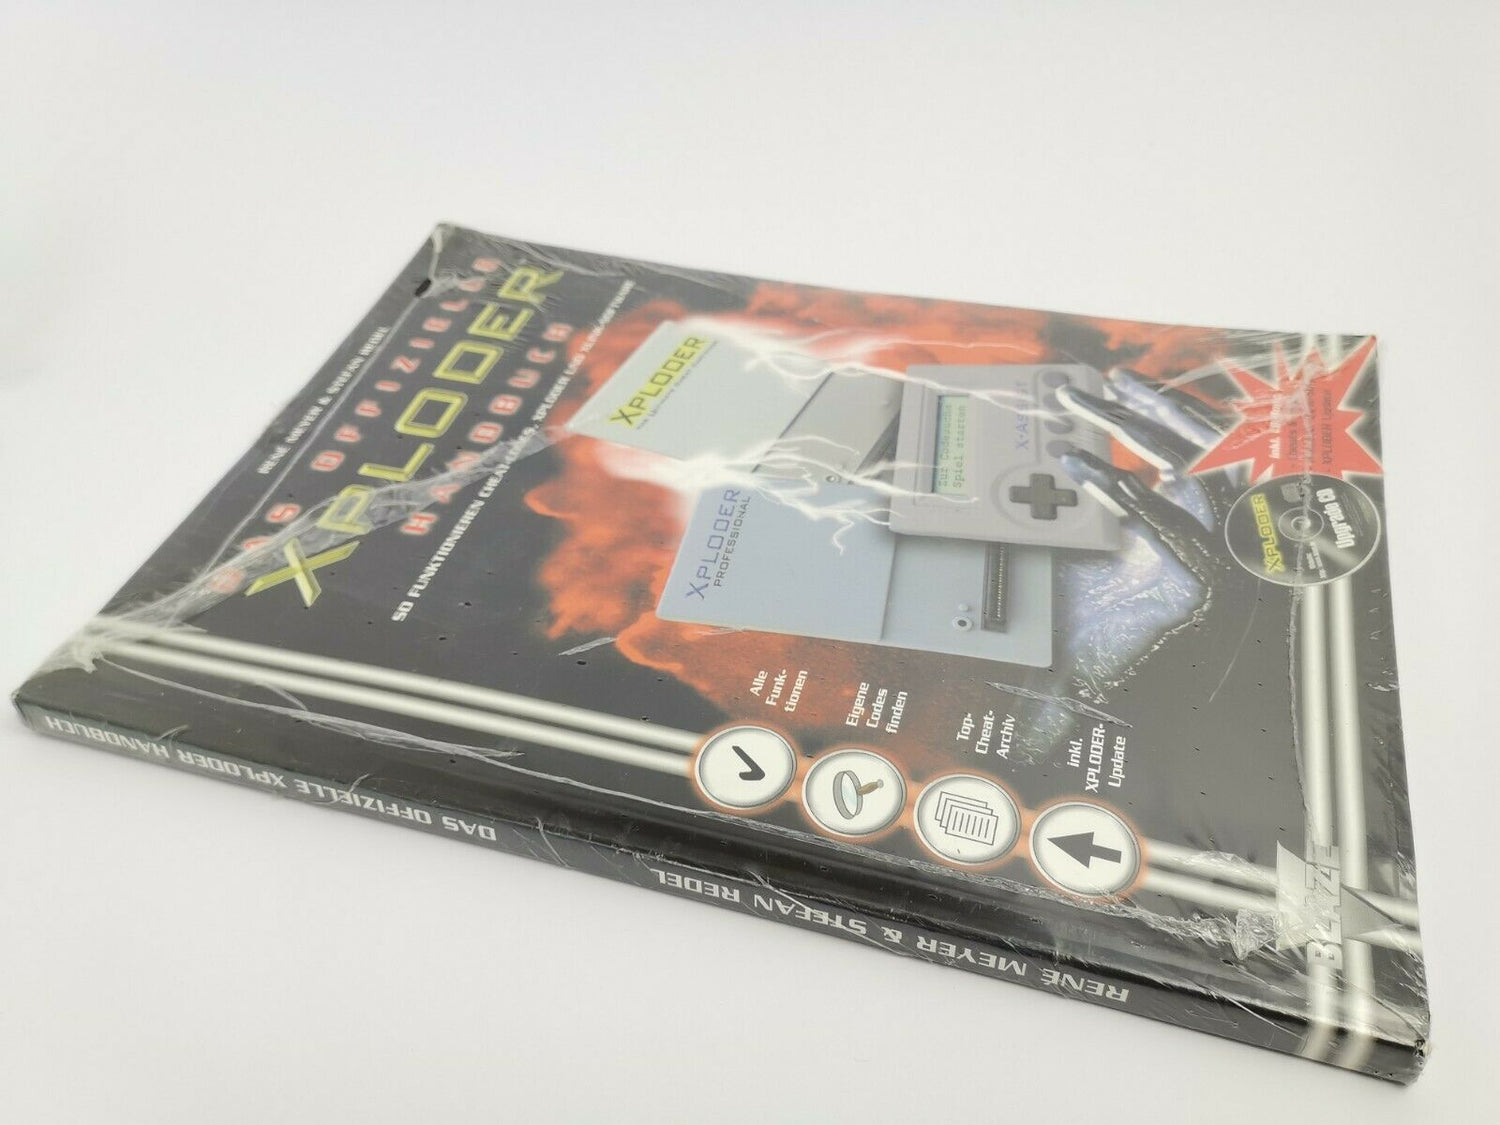 Sony Playstation 1 The Official Xploder Manual 